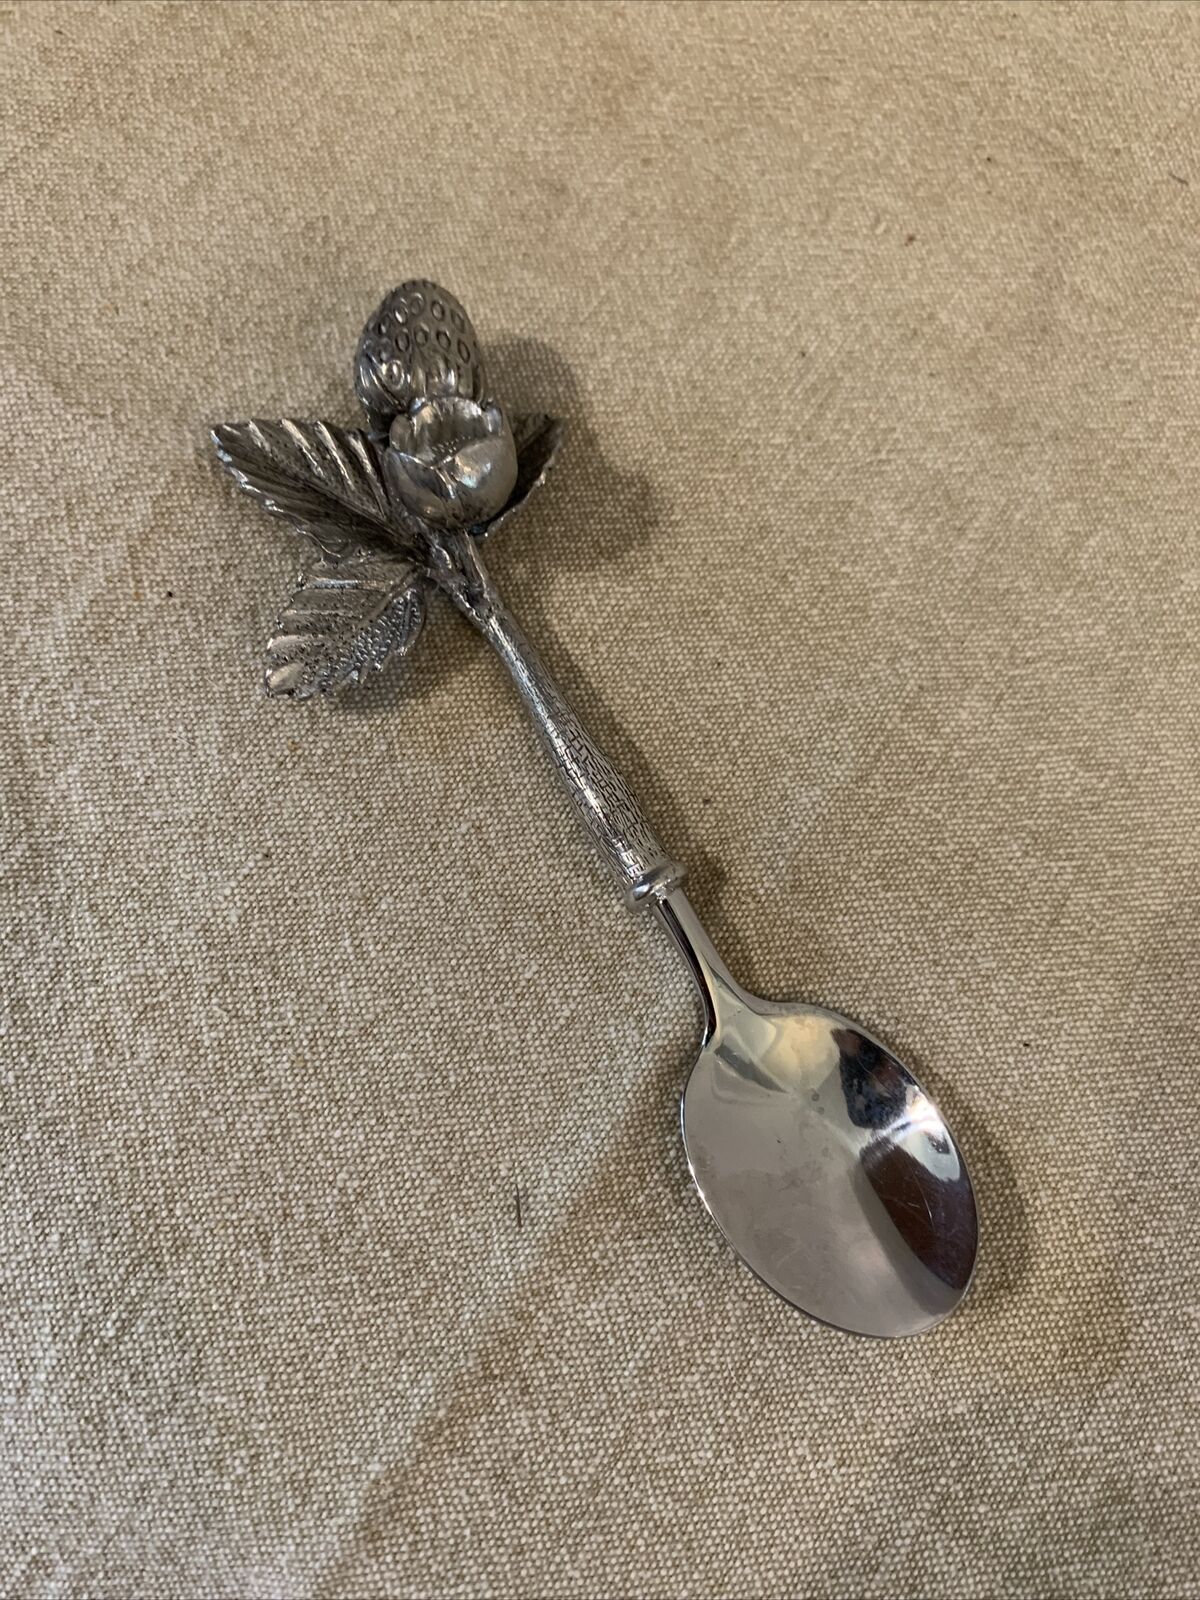 Vagabond House Pewter Metal Blueberry Jam/jelly/fruit/dip Spoon Coffee And Te...